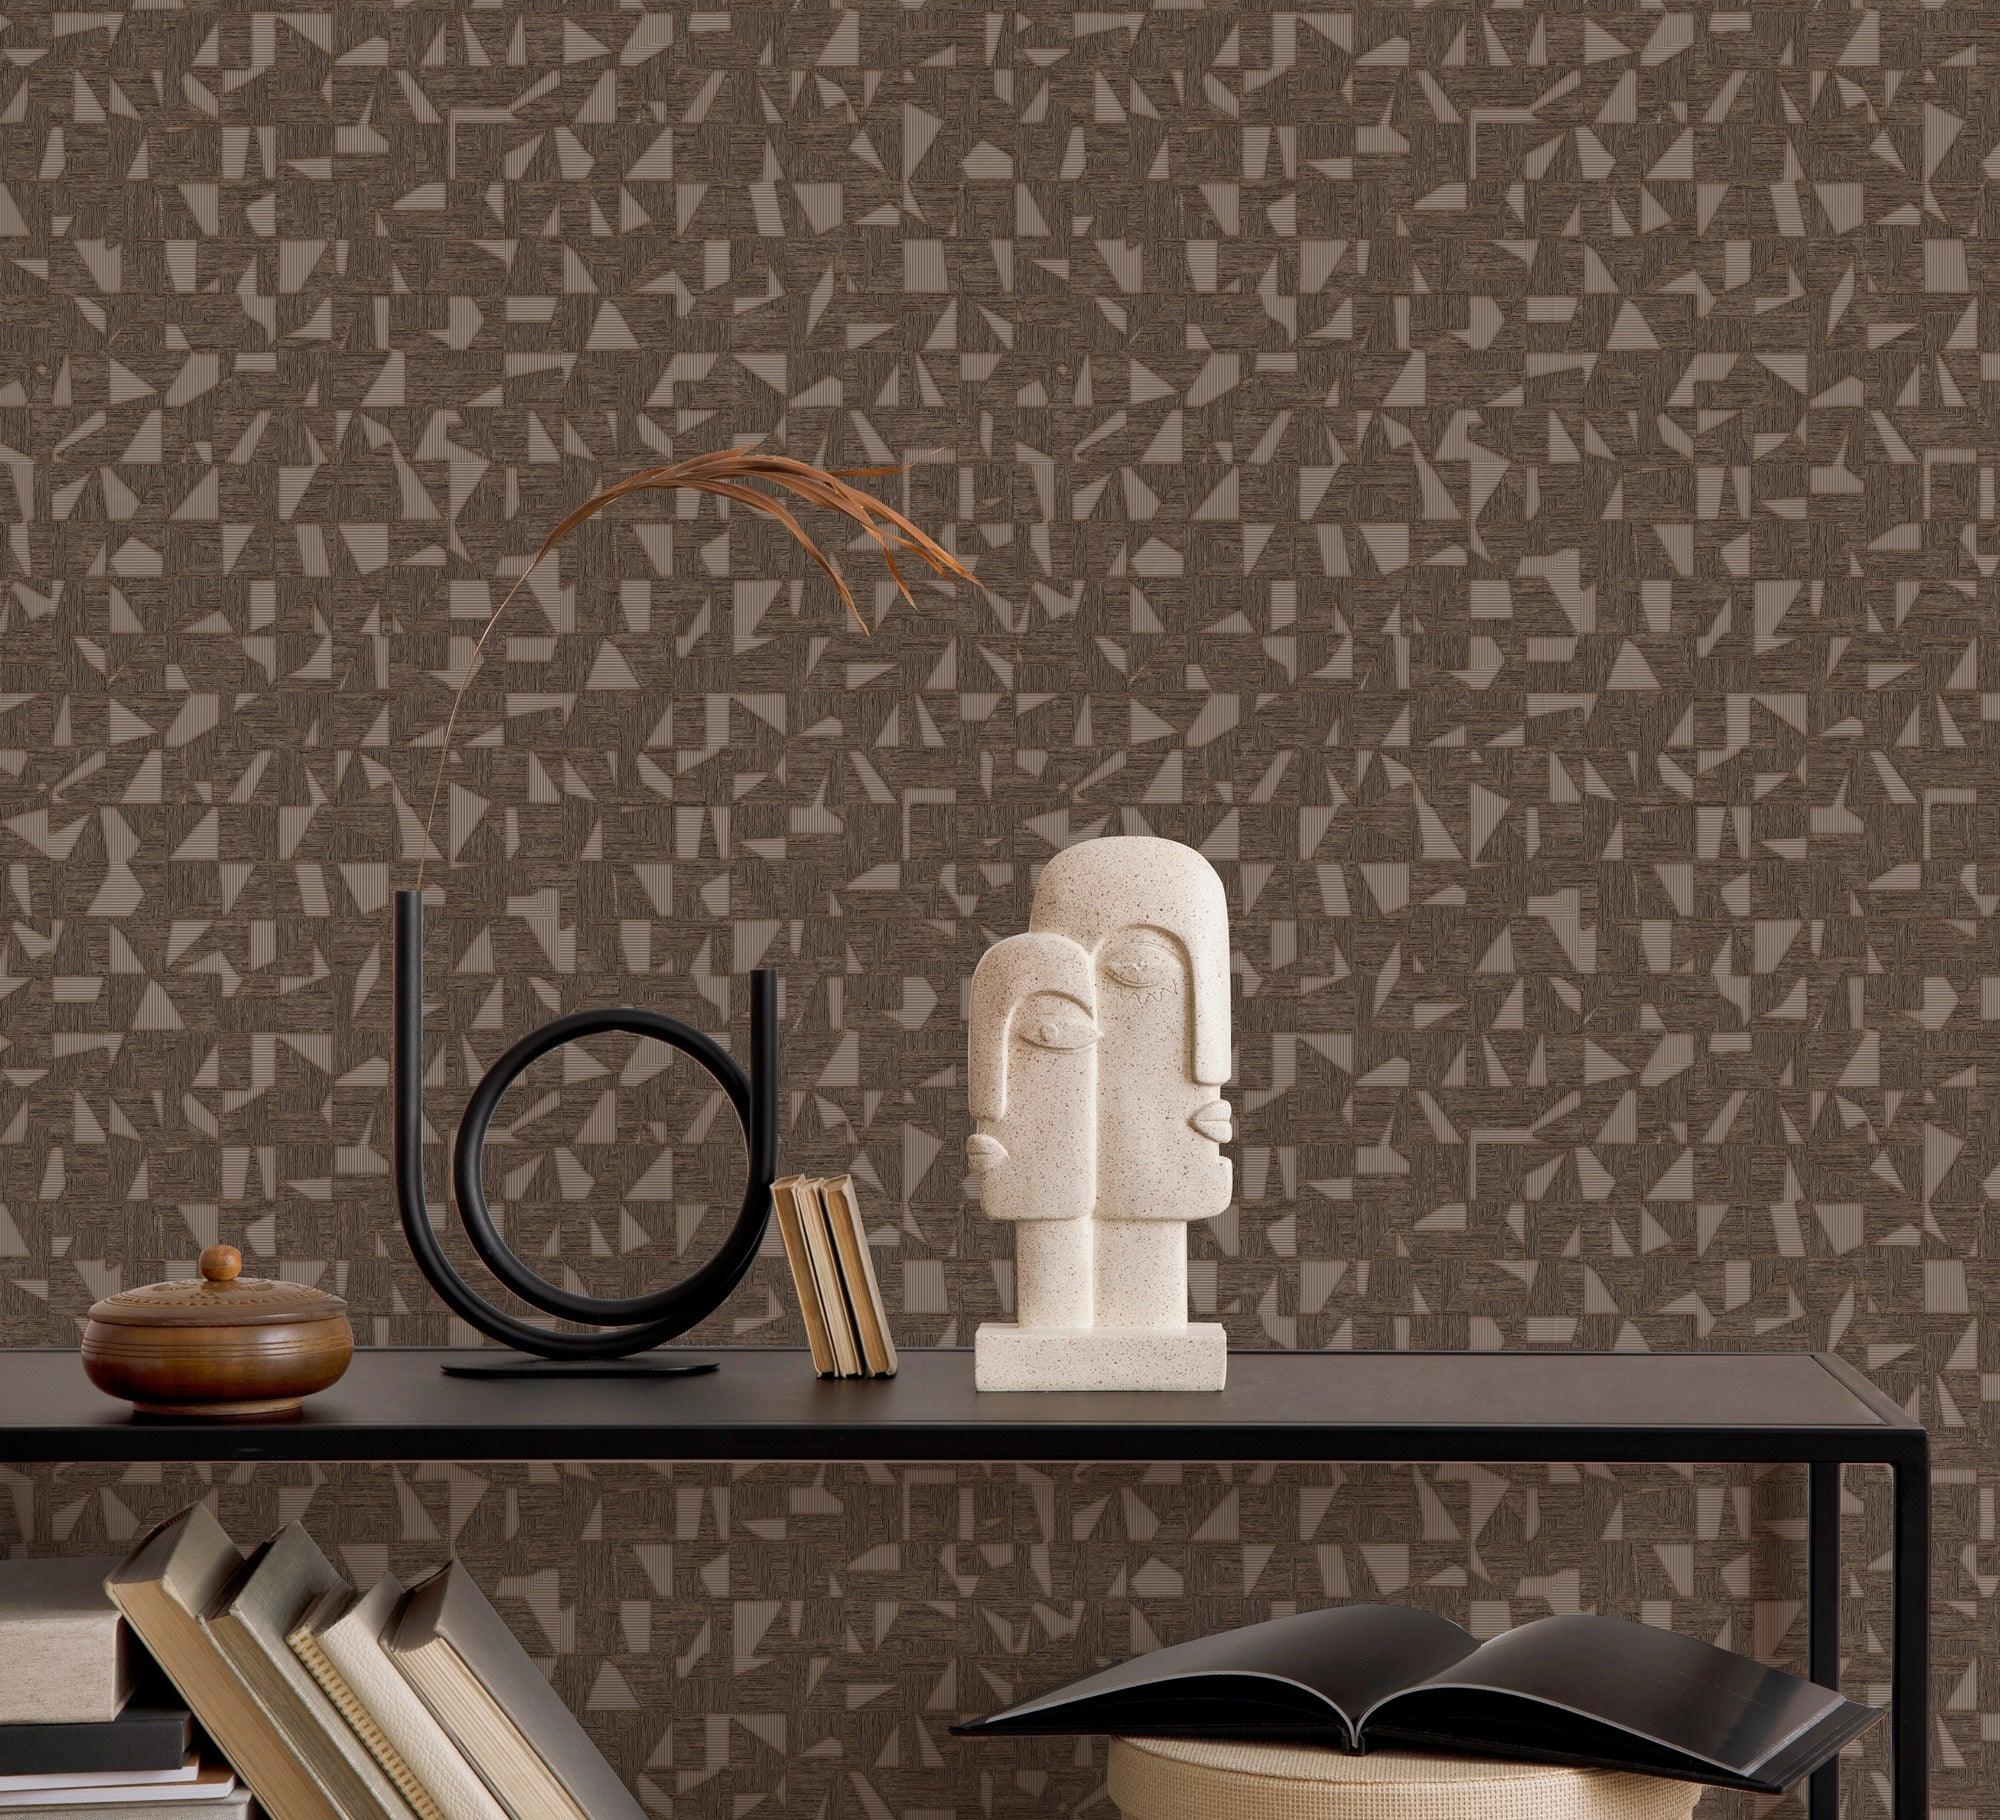 Walloro Textured Wallpapering Tips and Tricks: A Beginner's Guide to Textured Styles